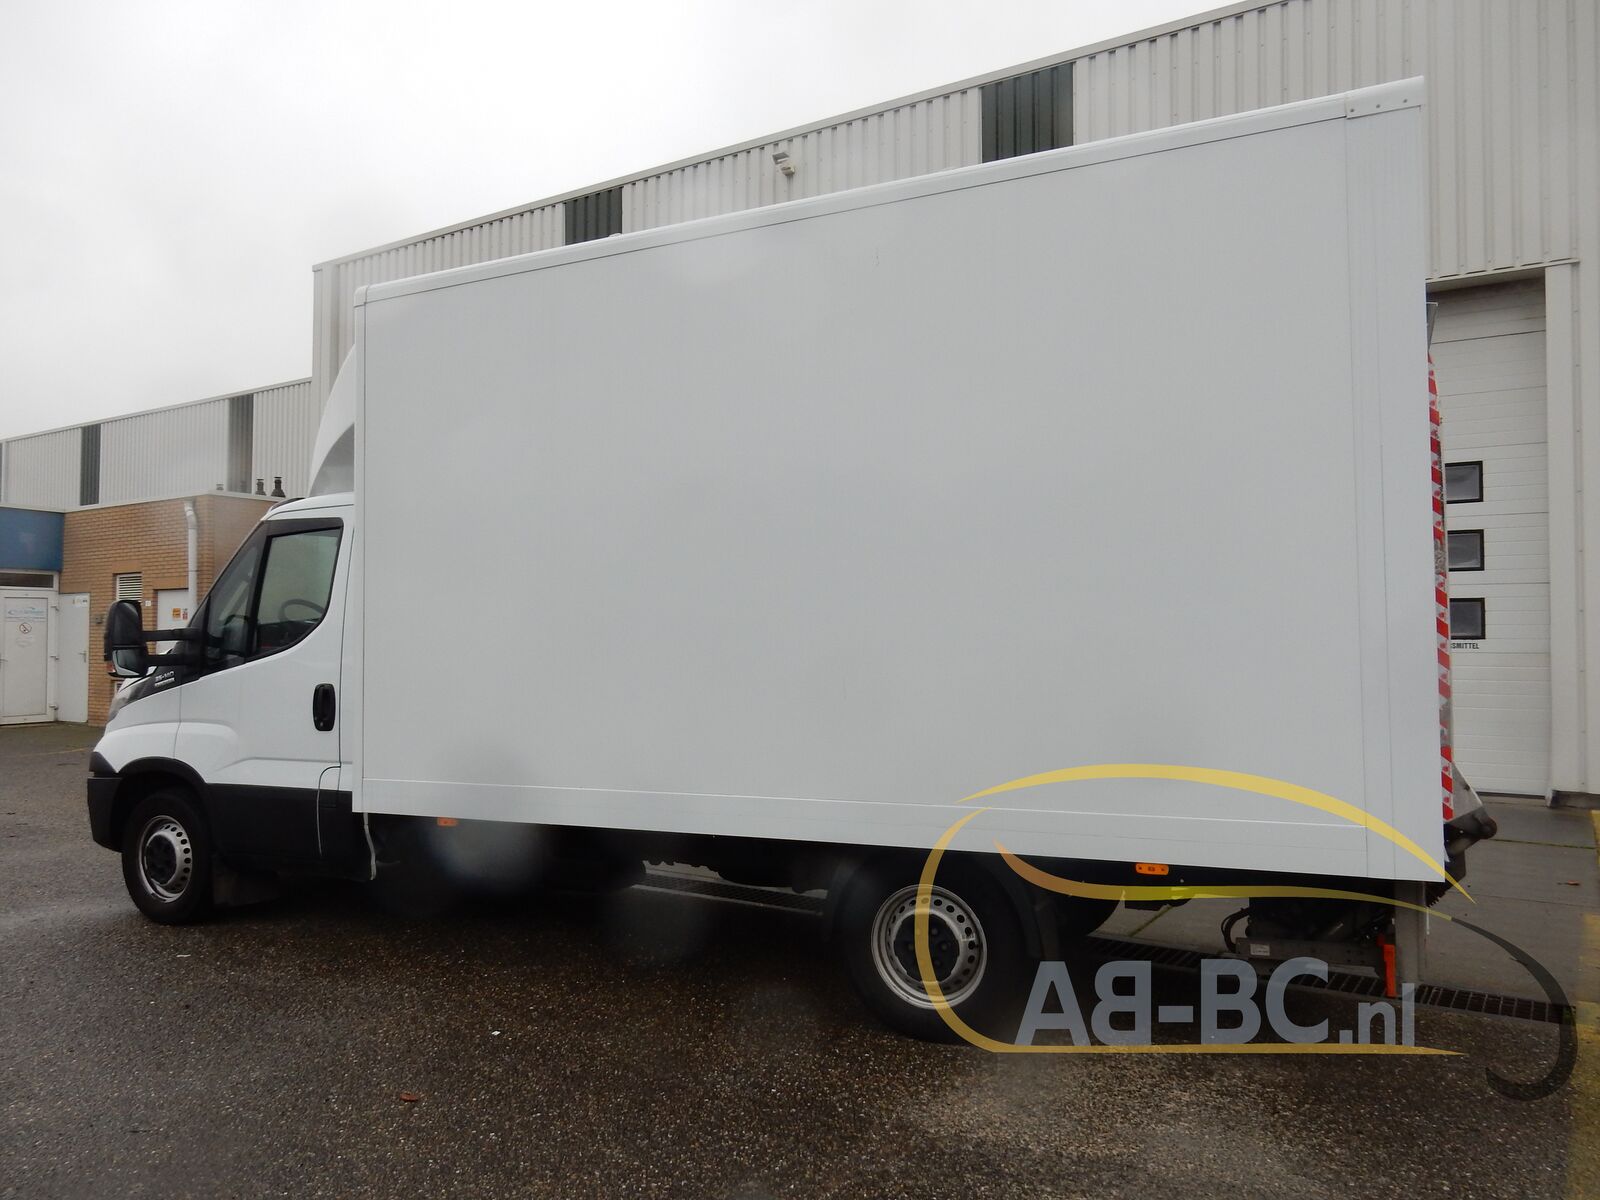 commercial-vehicle-box-truck-3-5t-IVECO-Daily-35S14A8-VEKO-EURO-6---1643899516501781694_orig_a462310c09c77ded30eb28fb9cad3035--22020316393903368600